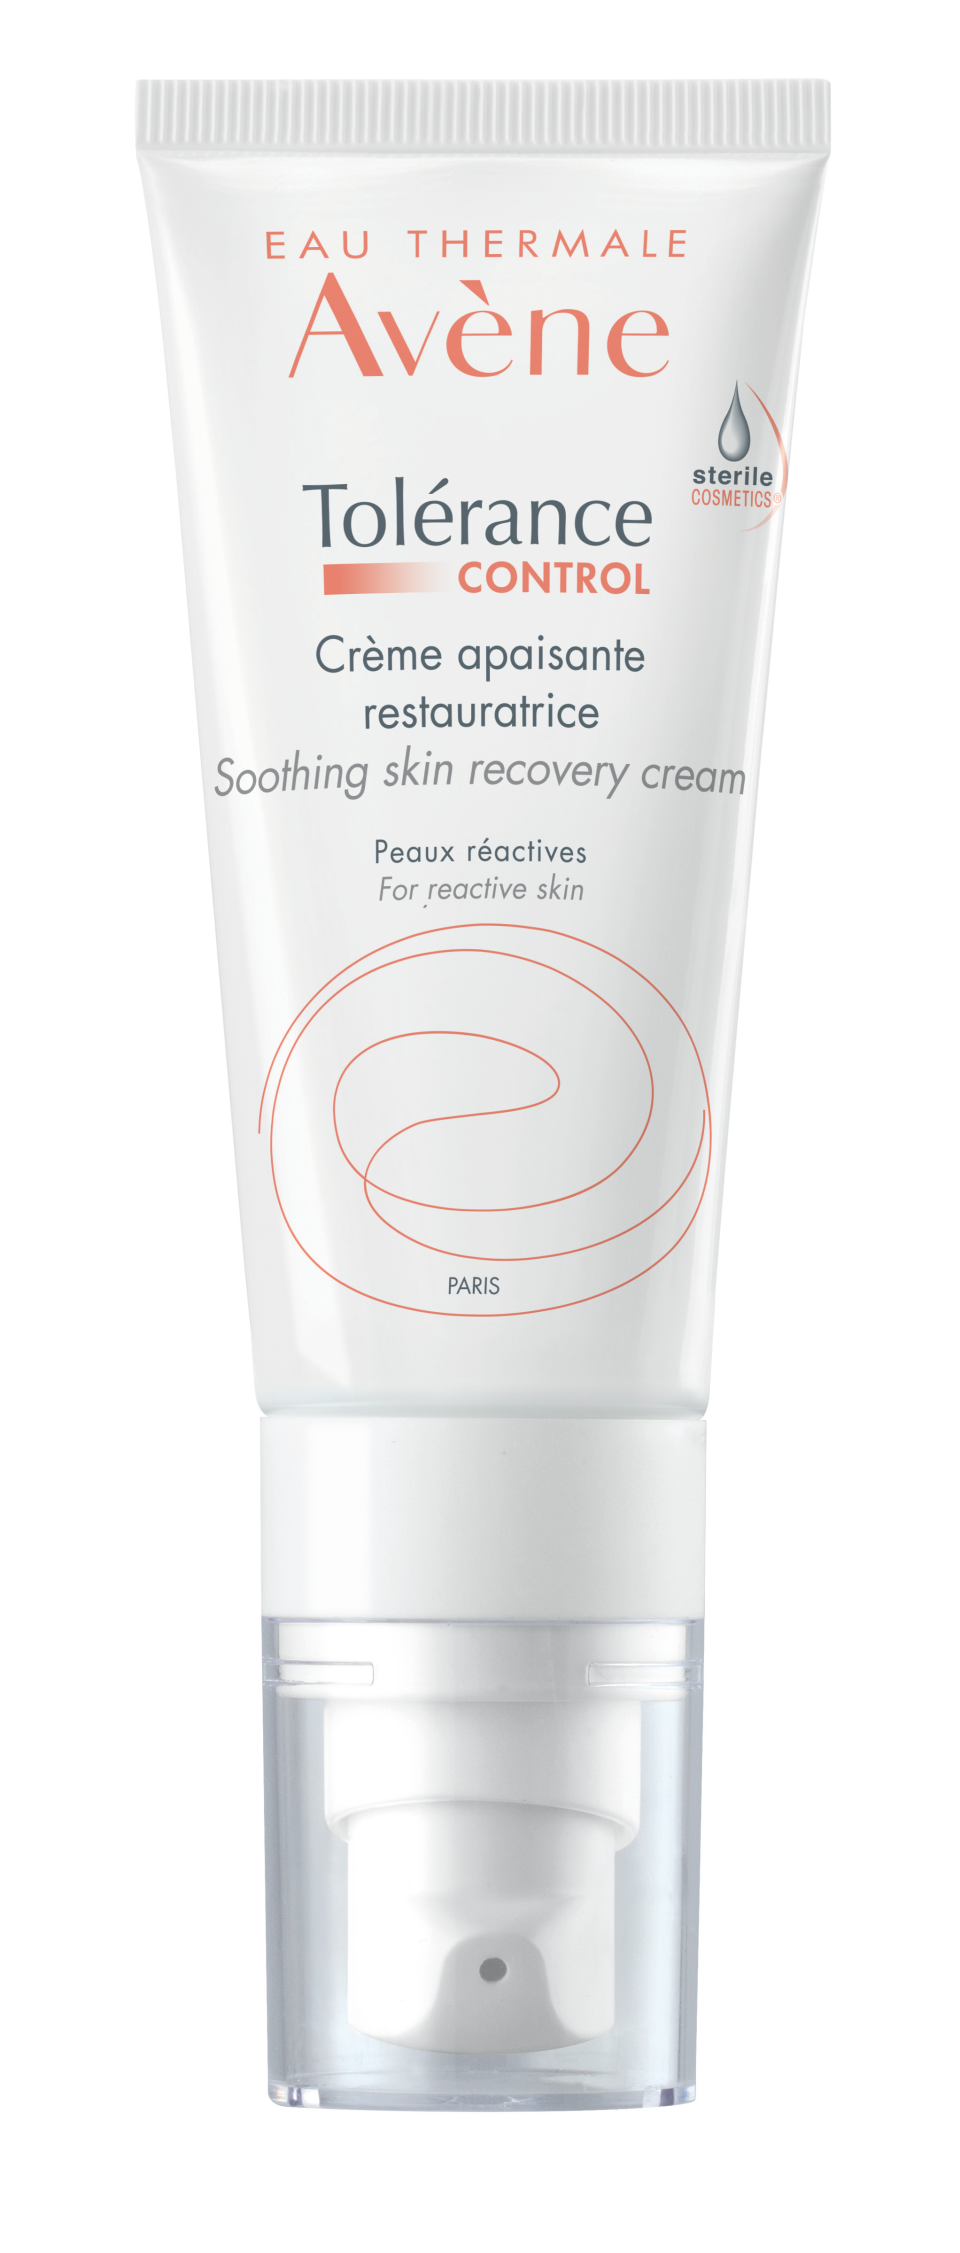 Avene Tolerance Control Soothing Skin Recovery Cream, S$60